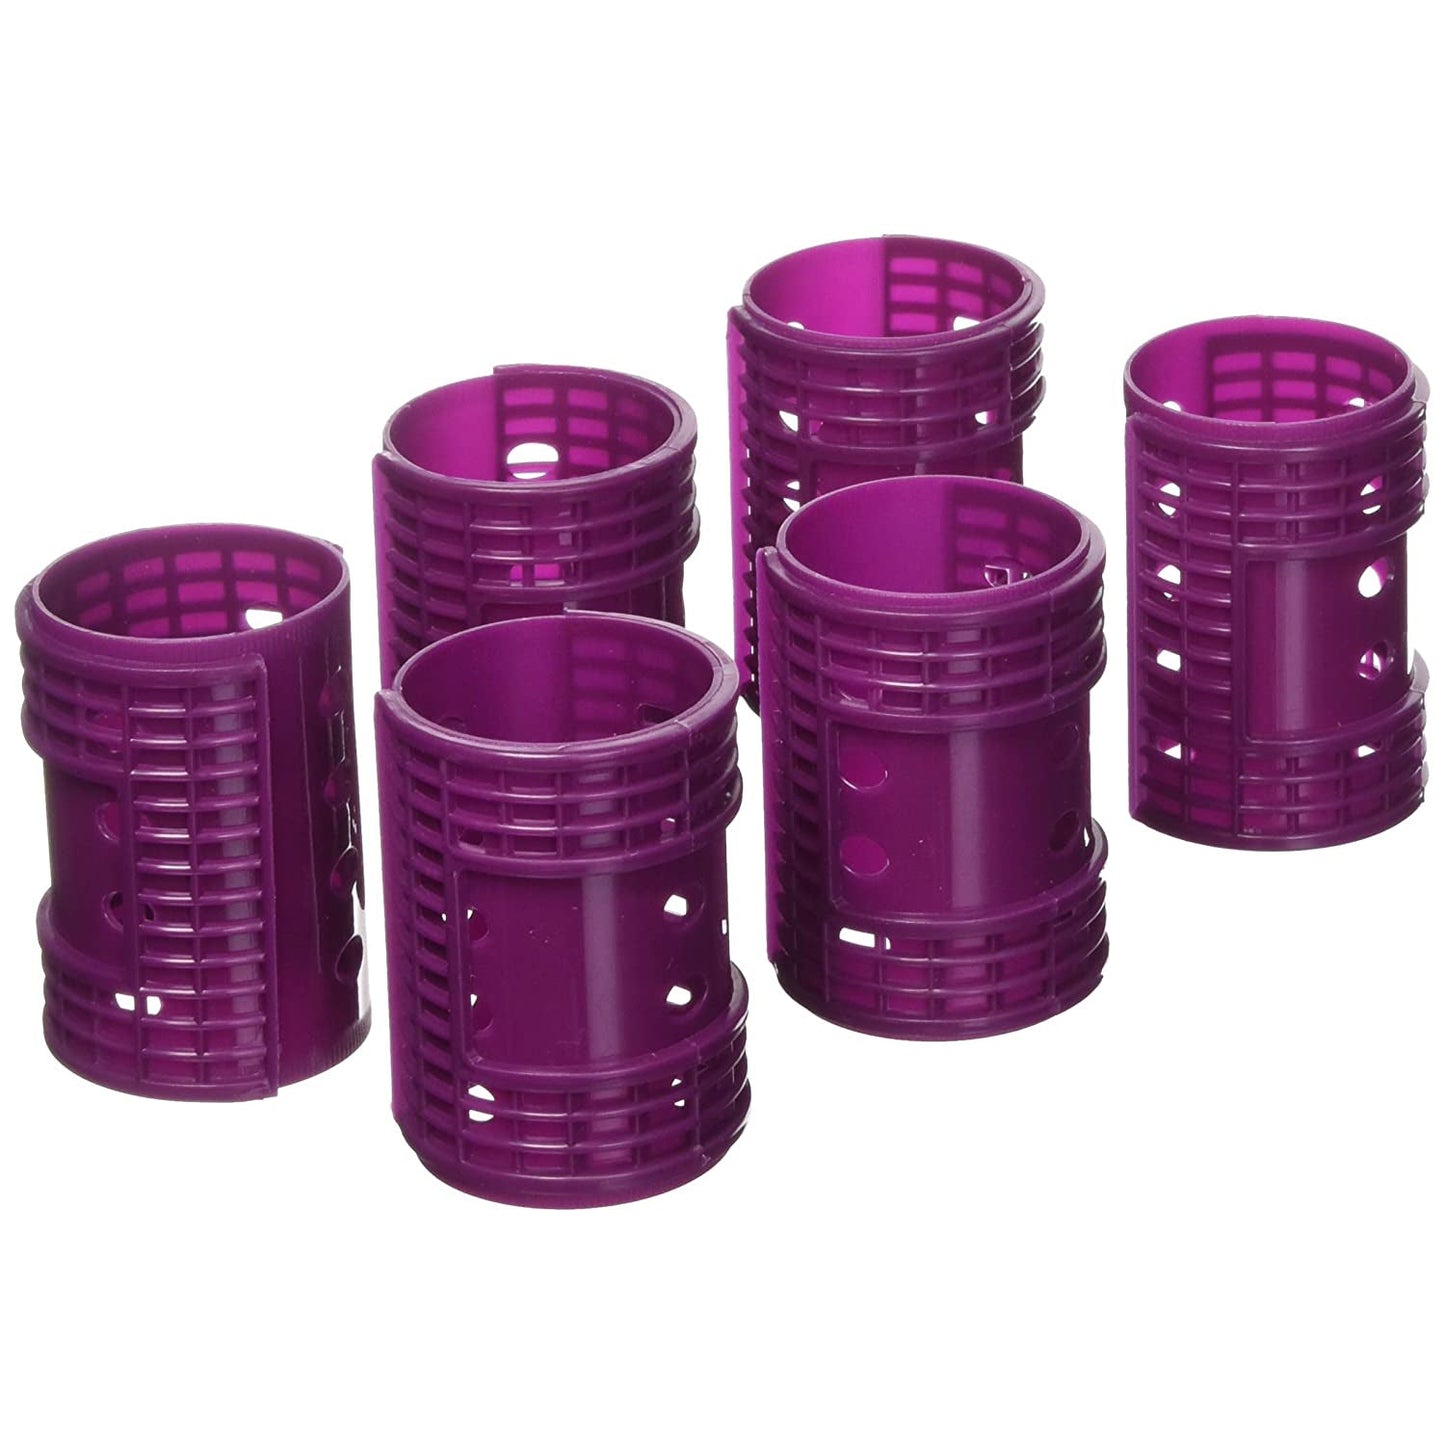 Magnetic Snap-on Rollers | 1-3/4" Diam. | 00425 | 6 Super Jumbo Rollers | SOFT N STYLE HAIR COLORING ACCESSORIES SOFT N STYLE 